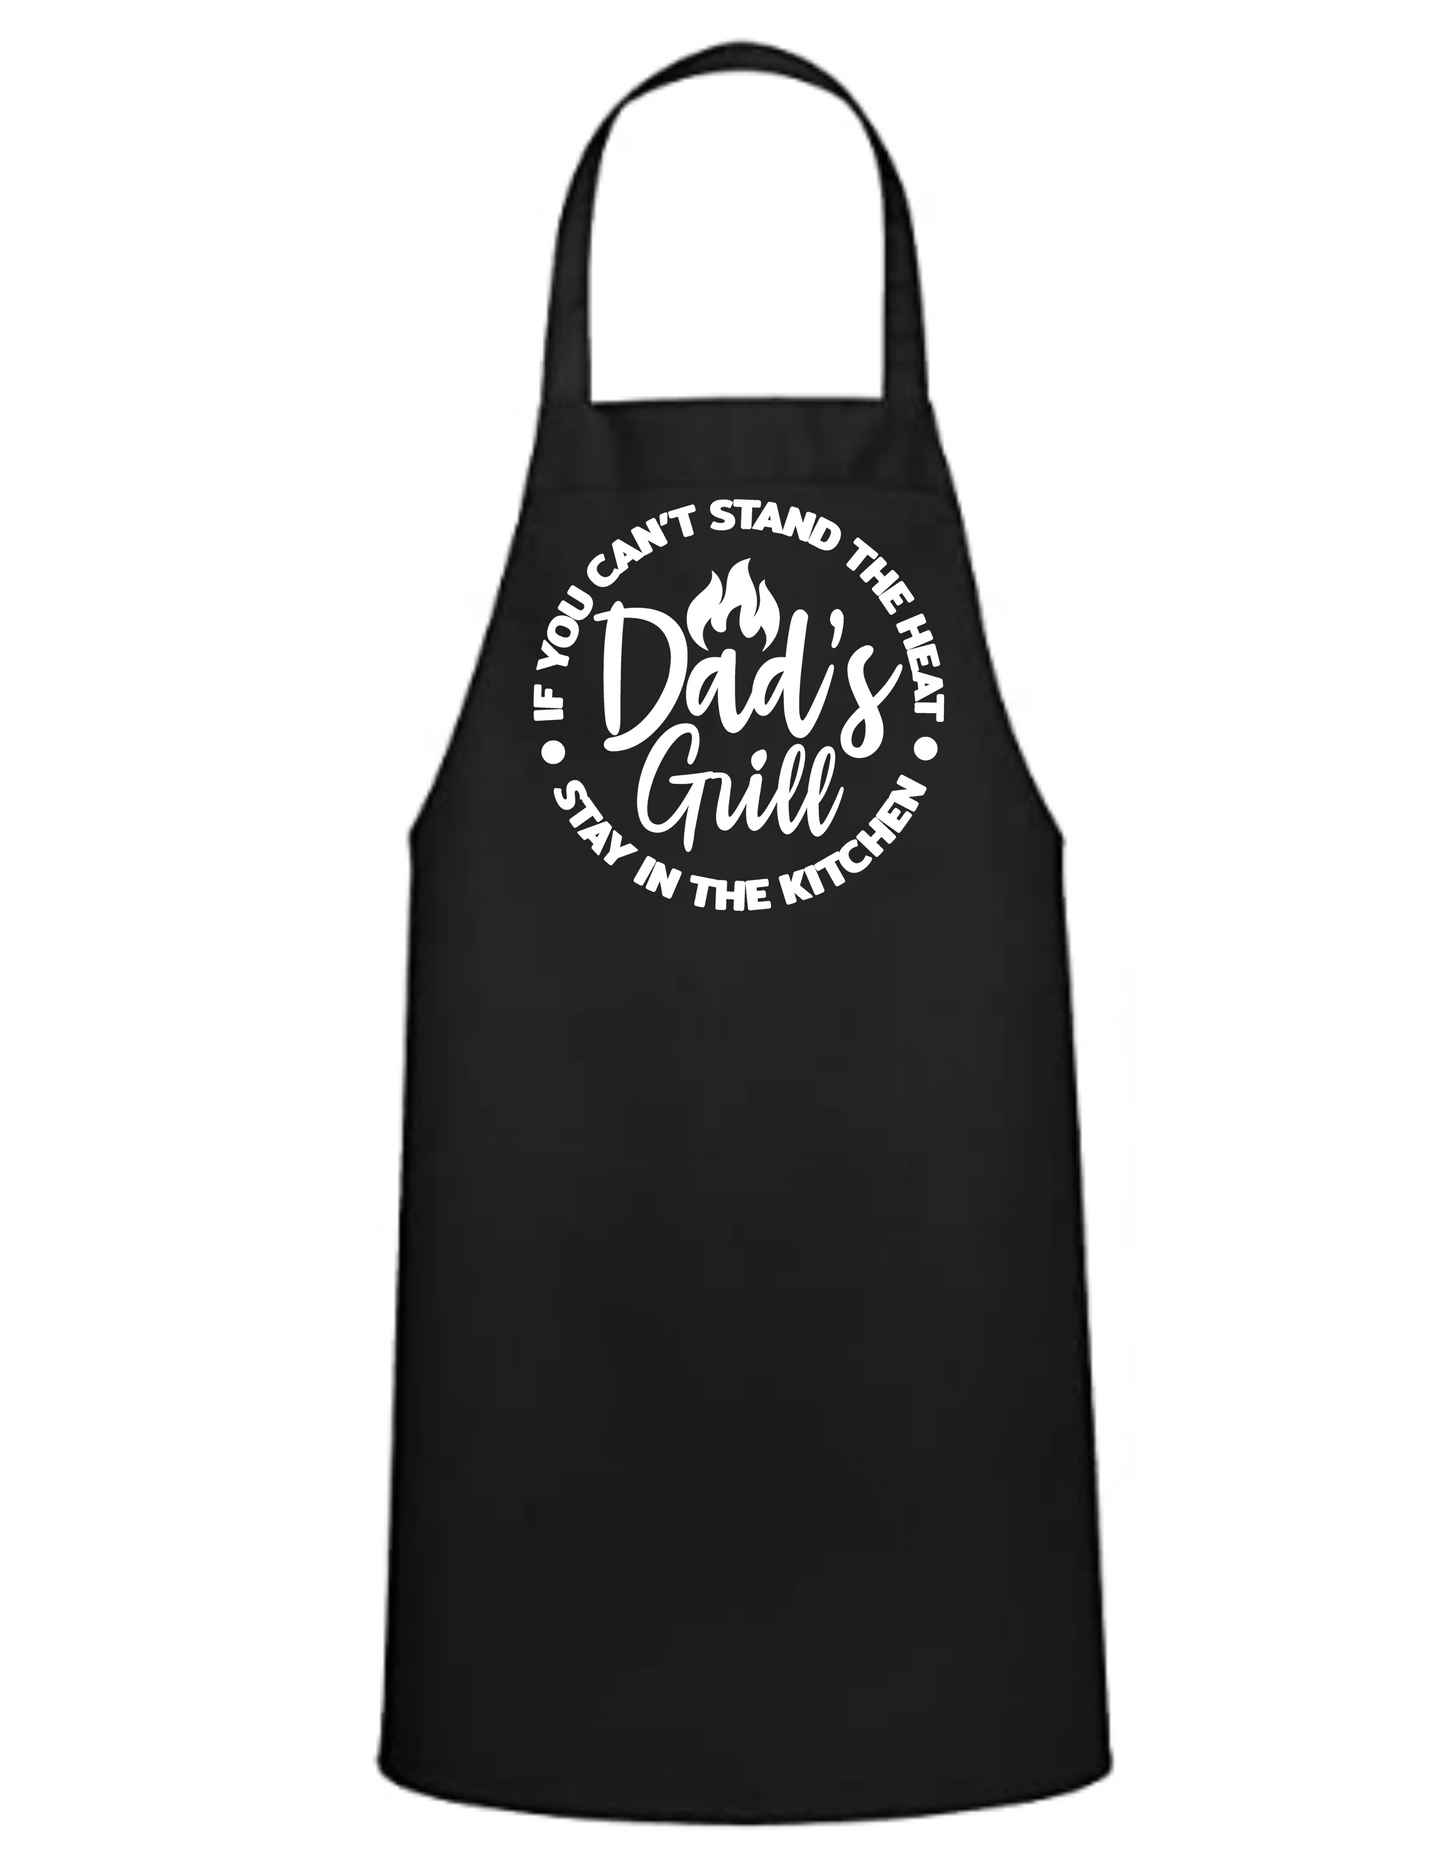 Dad's Grill Apron - Great Gift - Commercial Grade - Mister Snarky's